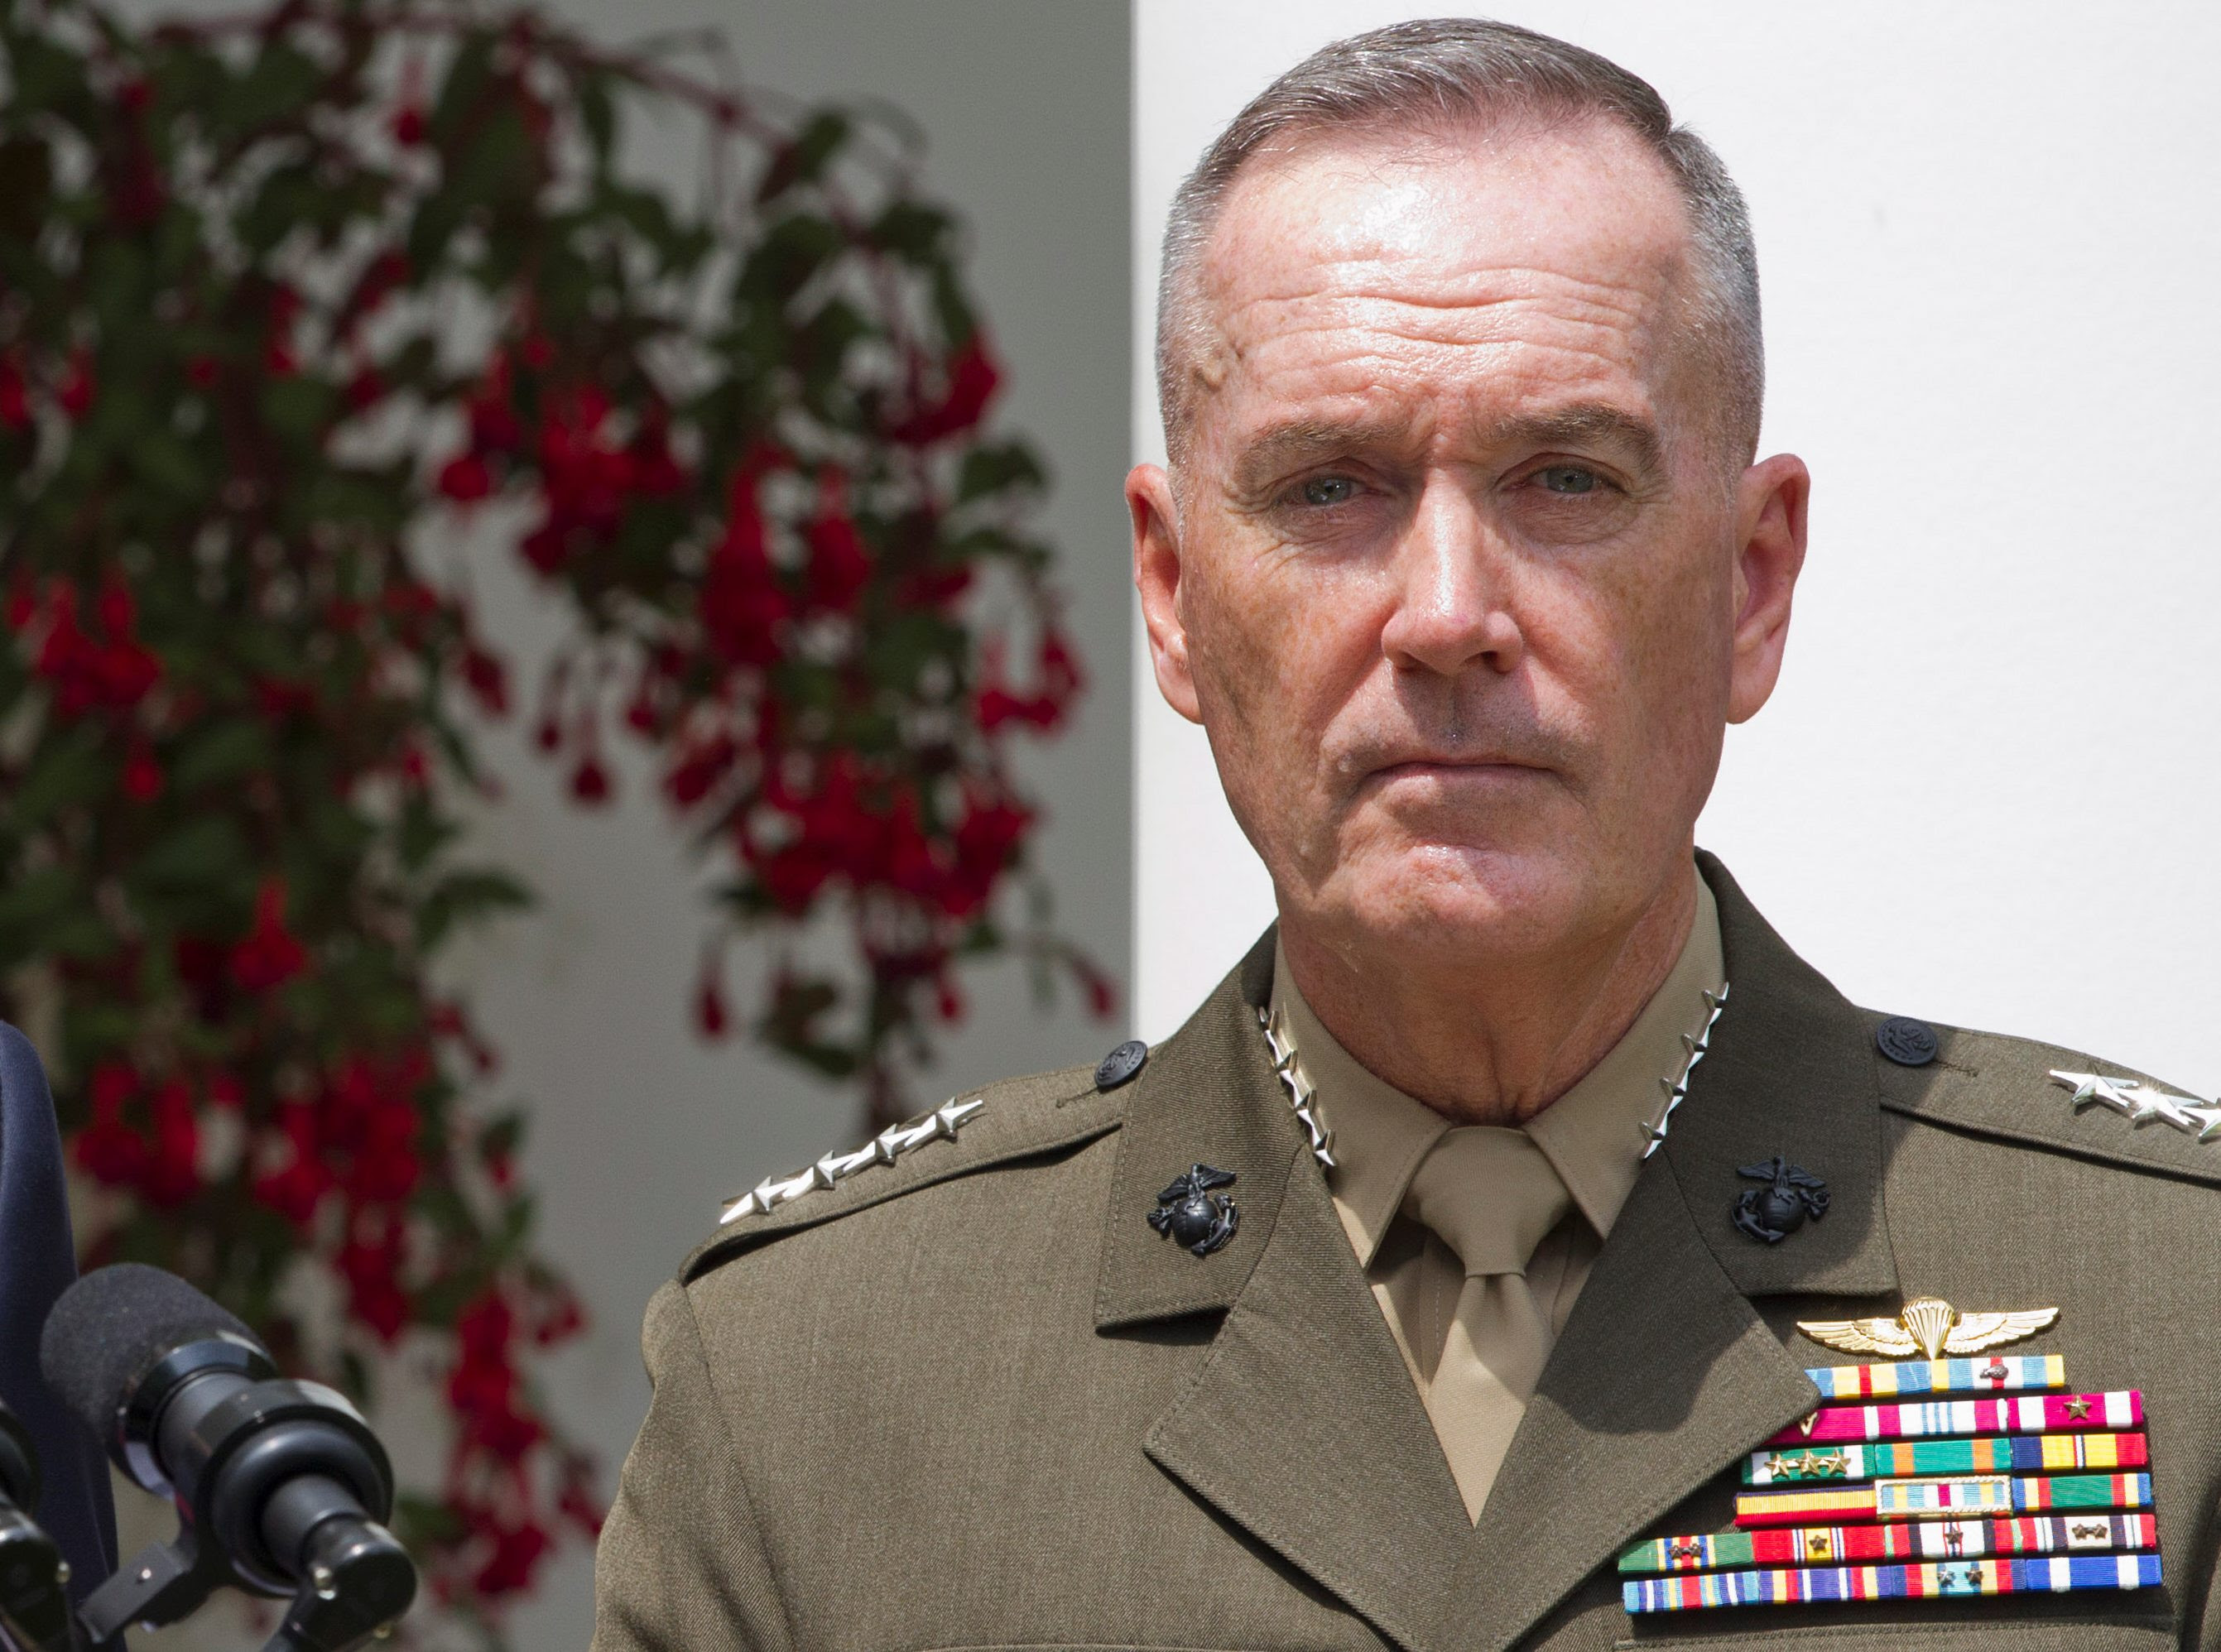 THE POSTER CHILD SAYS IT ALL  5_102015_obama-joint-chiefs-chair-248201